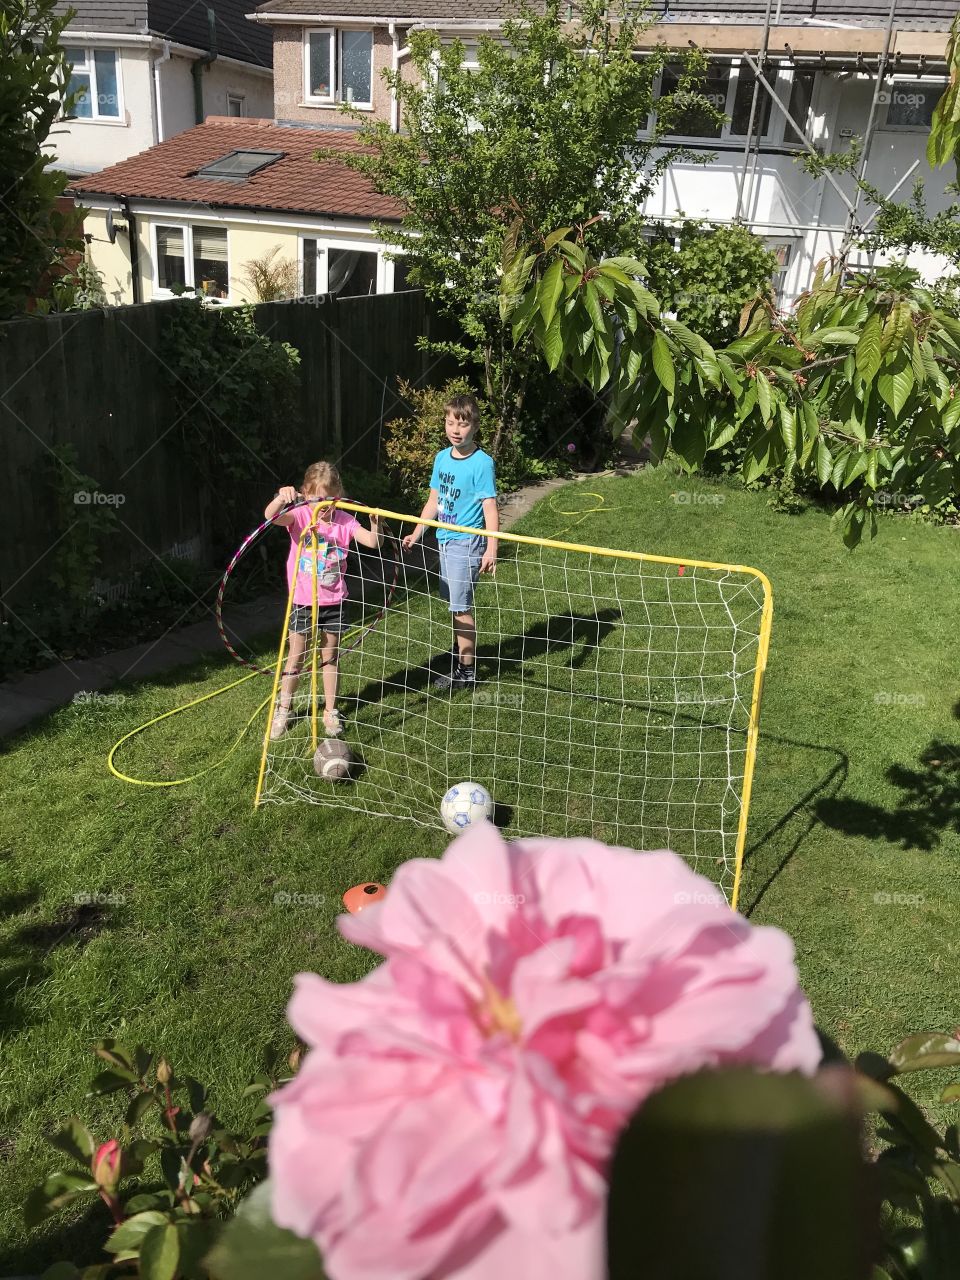 Rose, football goals and kids in the back garden having their first brake after homeschool lesson due to lockdown... 